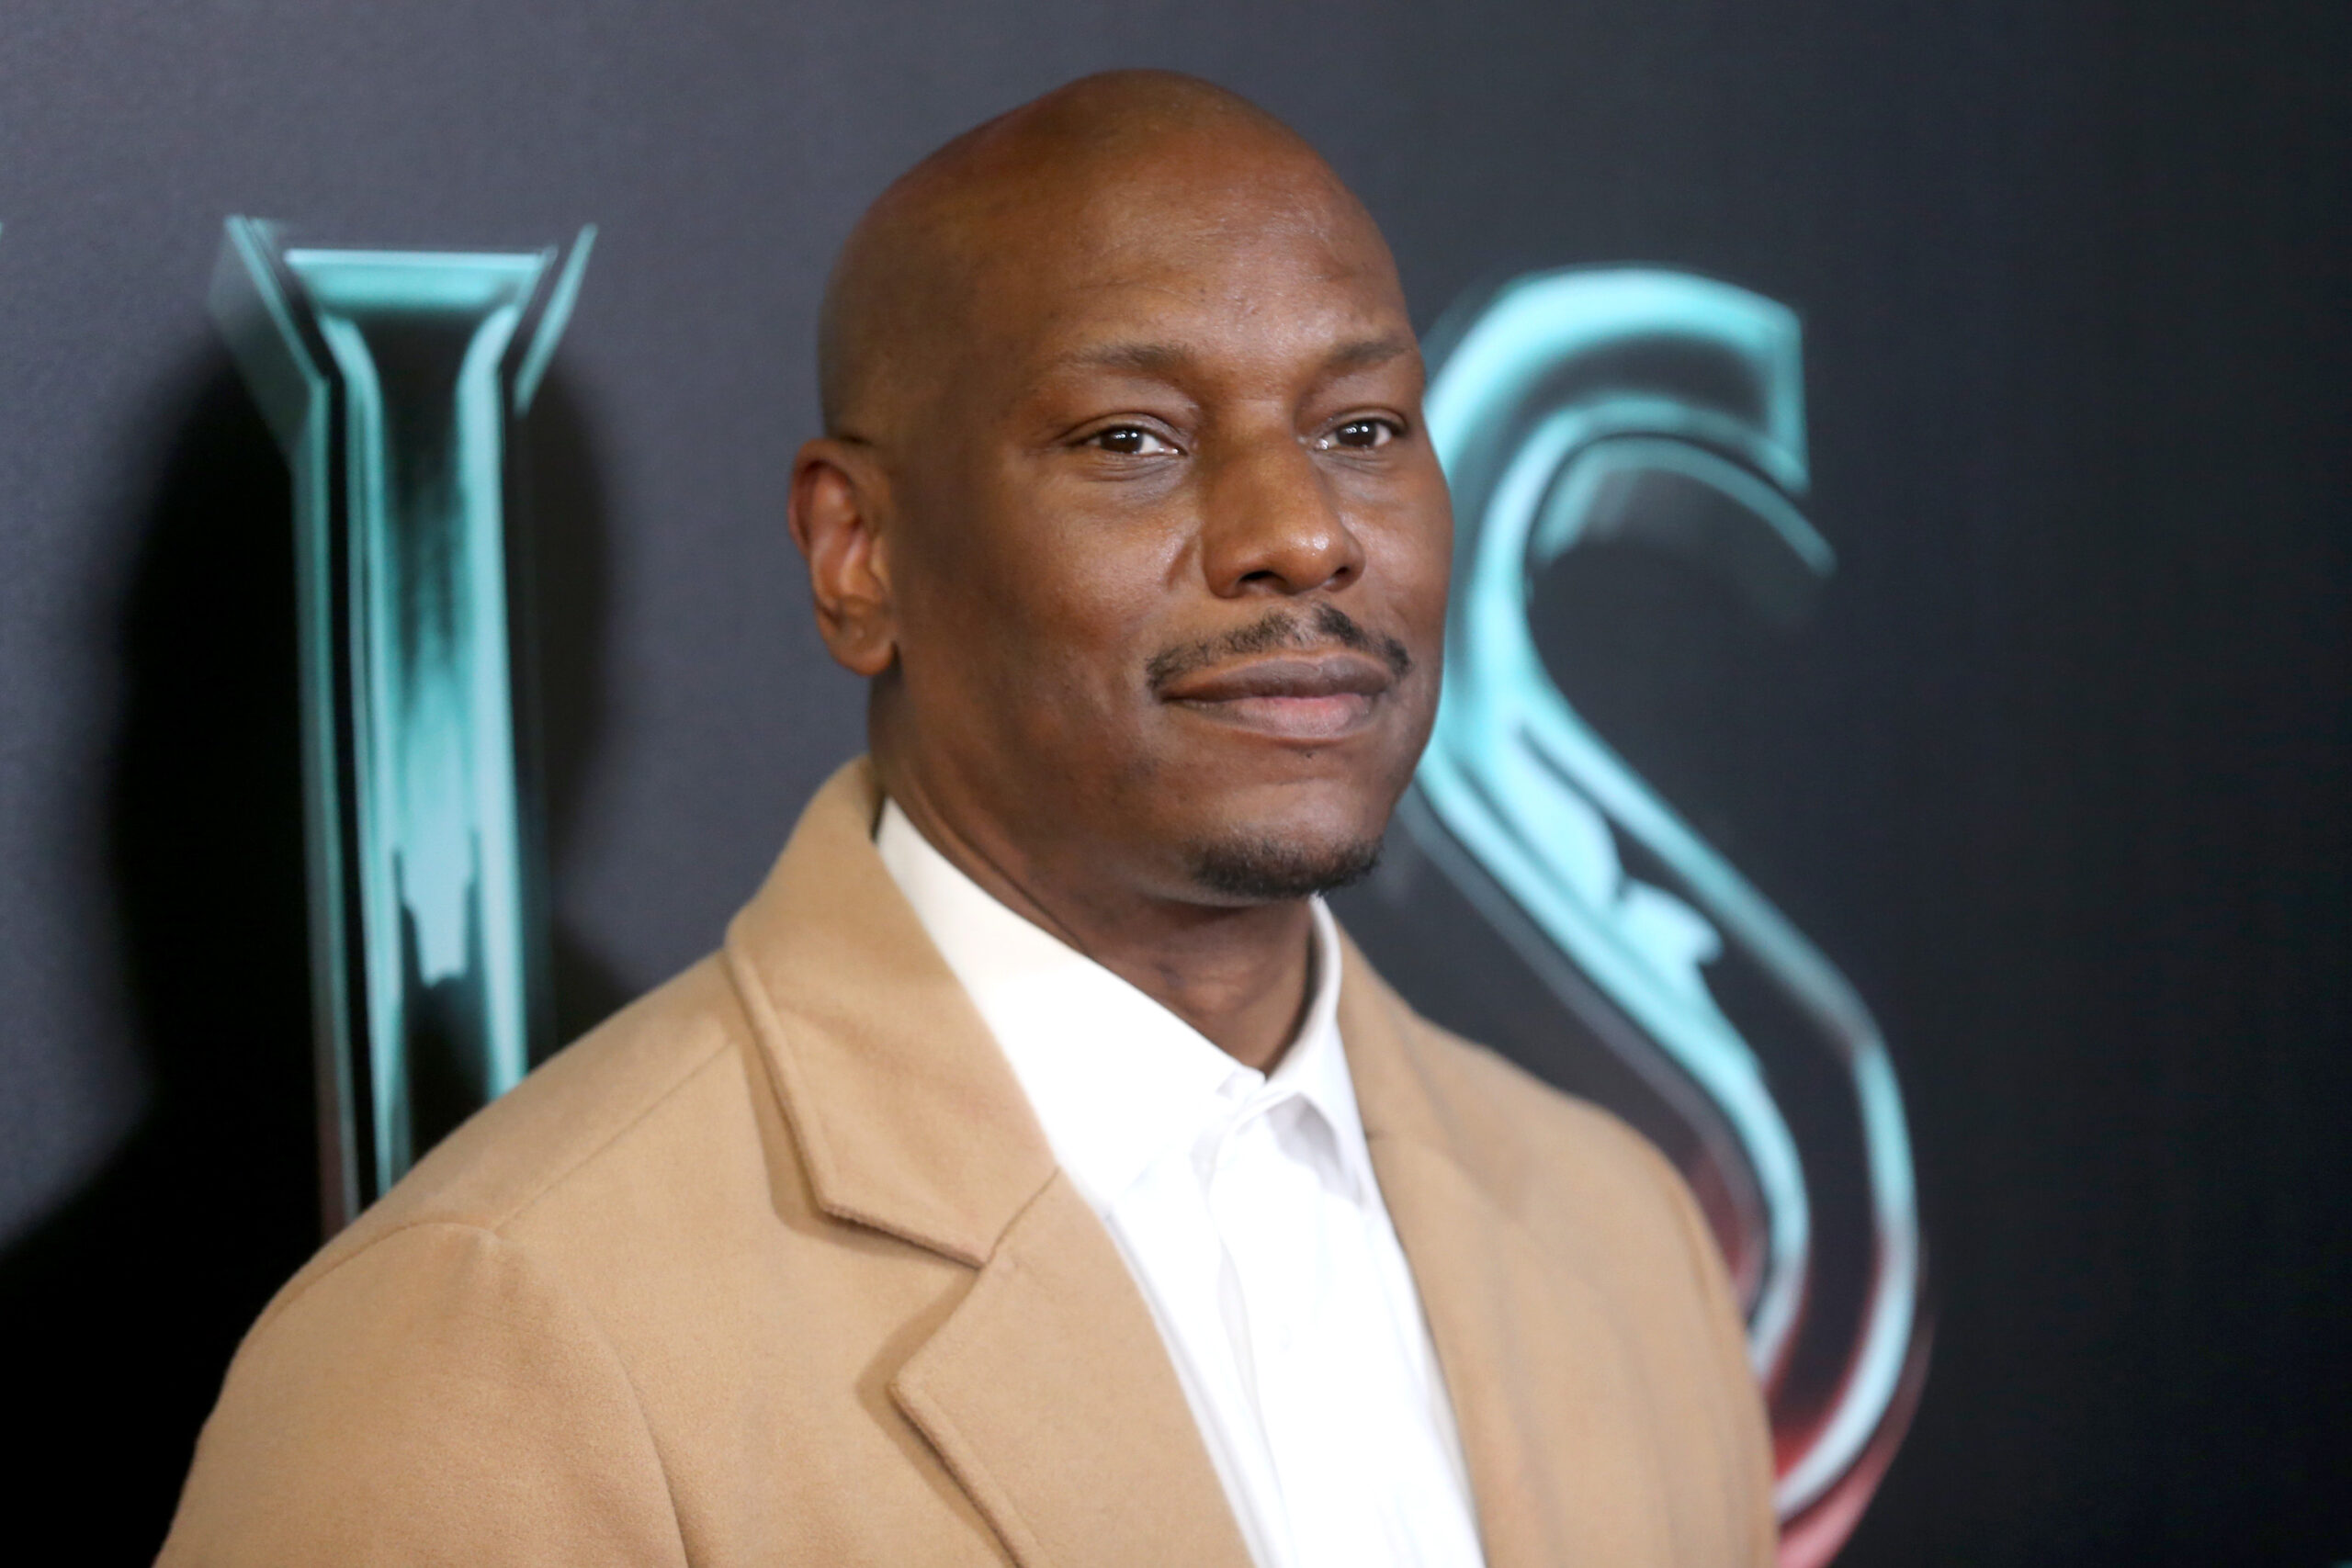 Tyrese Gibson Buys His Oldest Daughter a Rolls Royce After Missing Her Middle School Graduation for Work